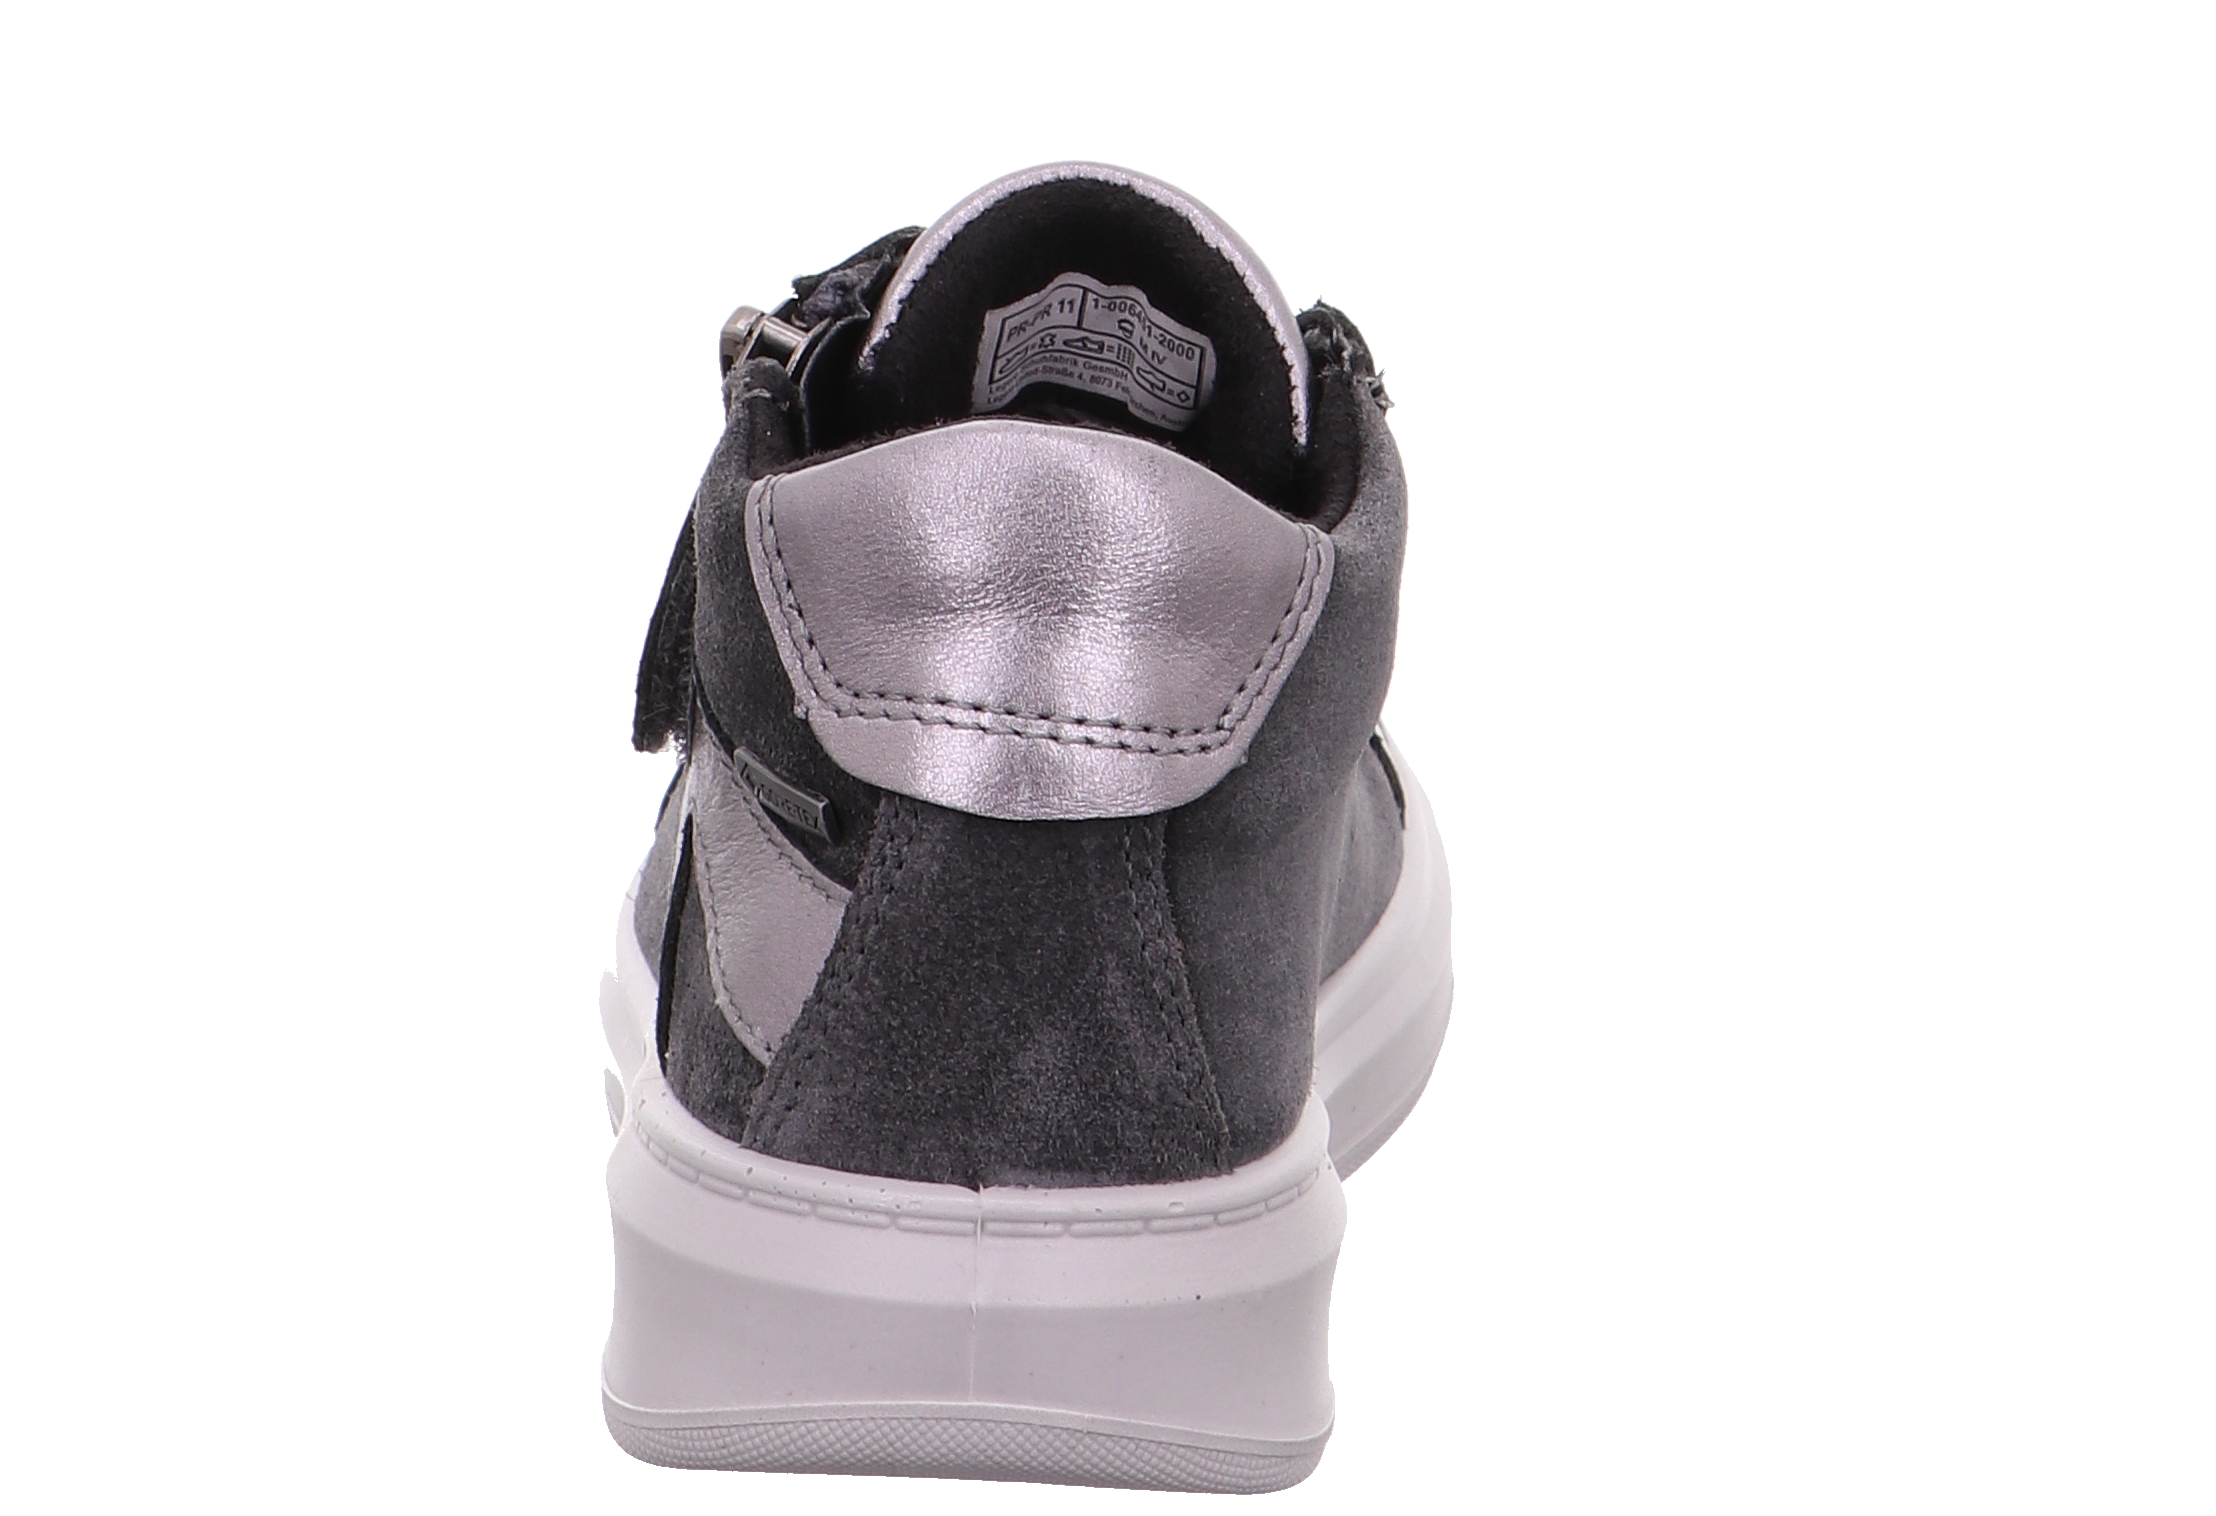 Superfit Cosmo - Grey / Silver suede leather